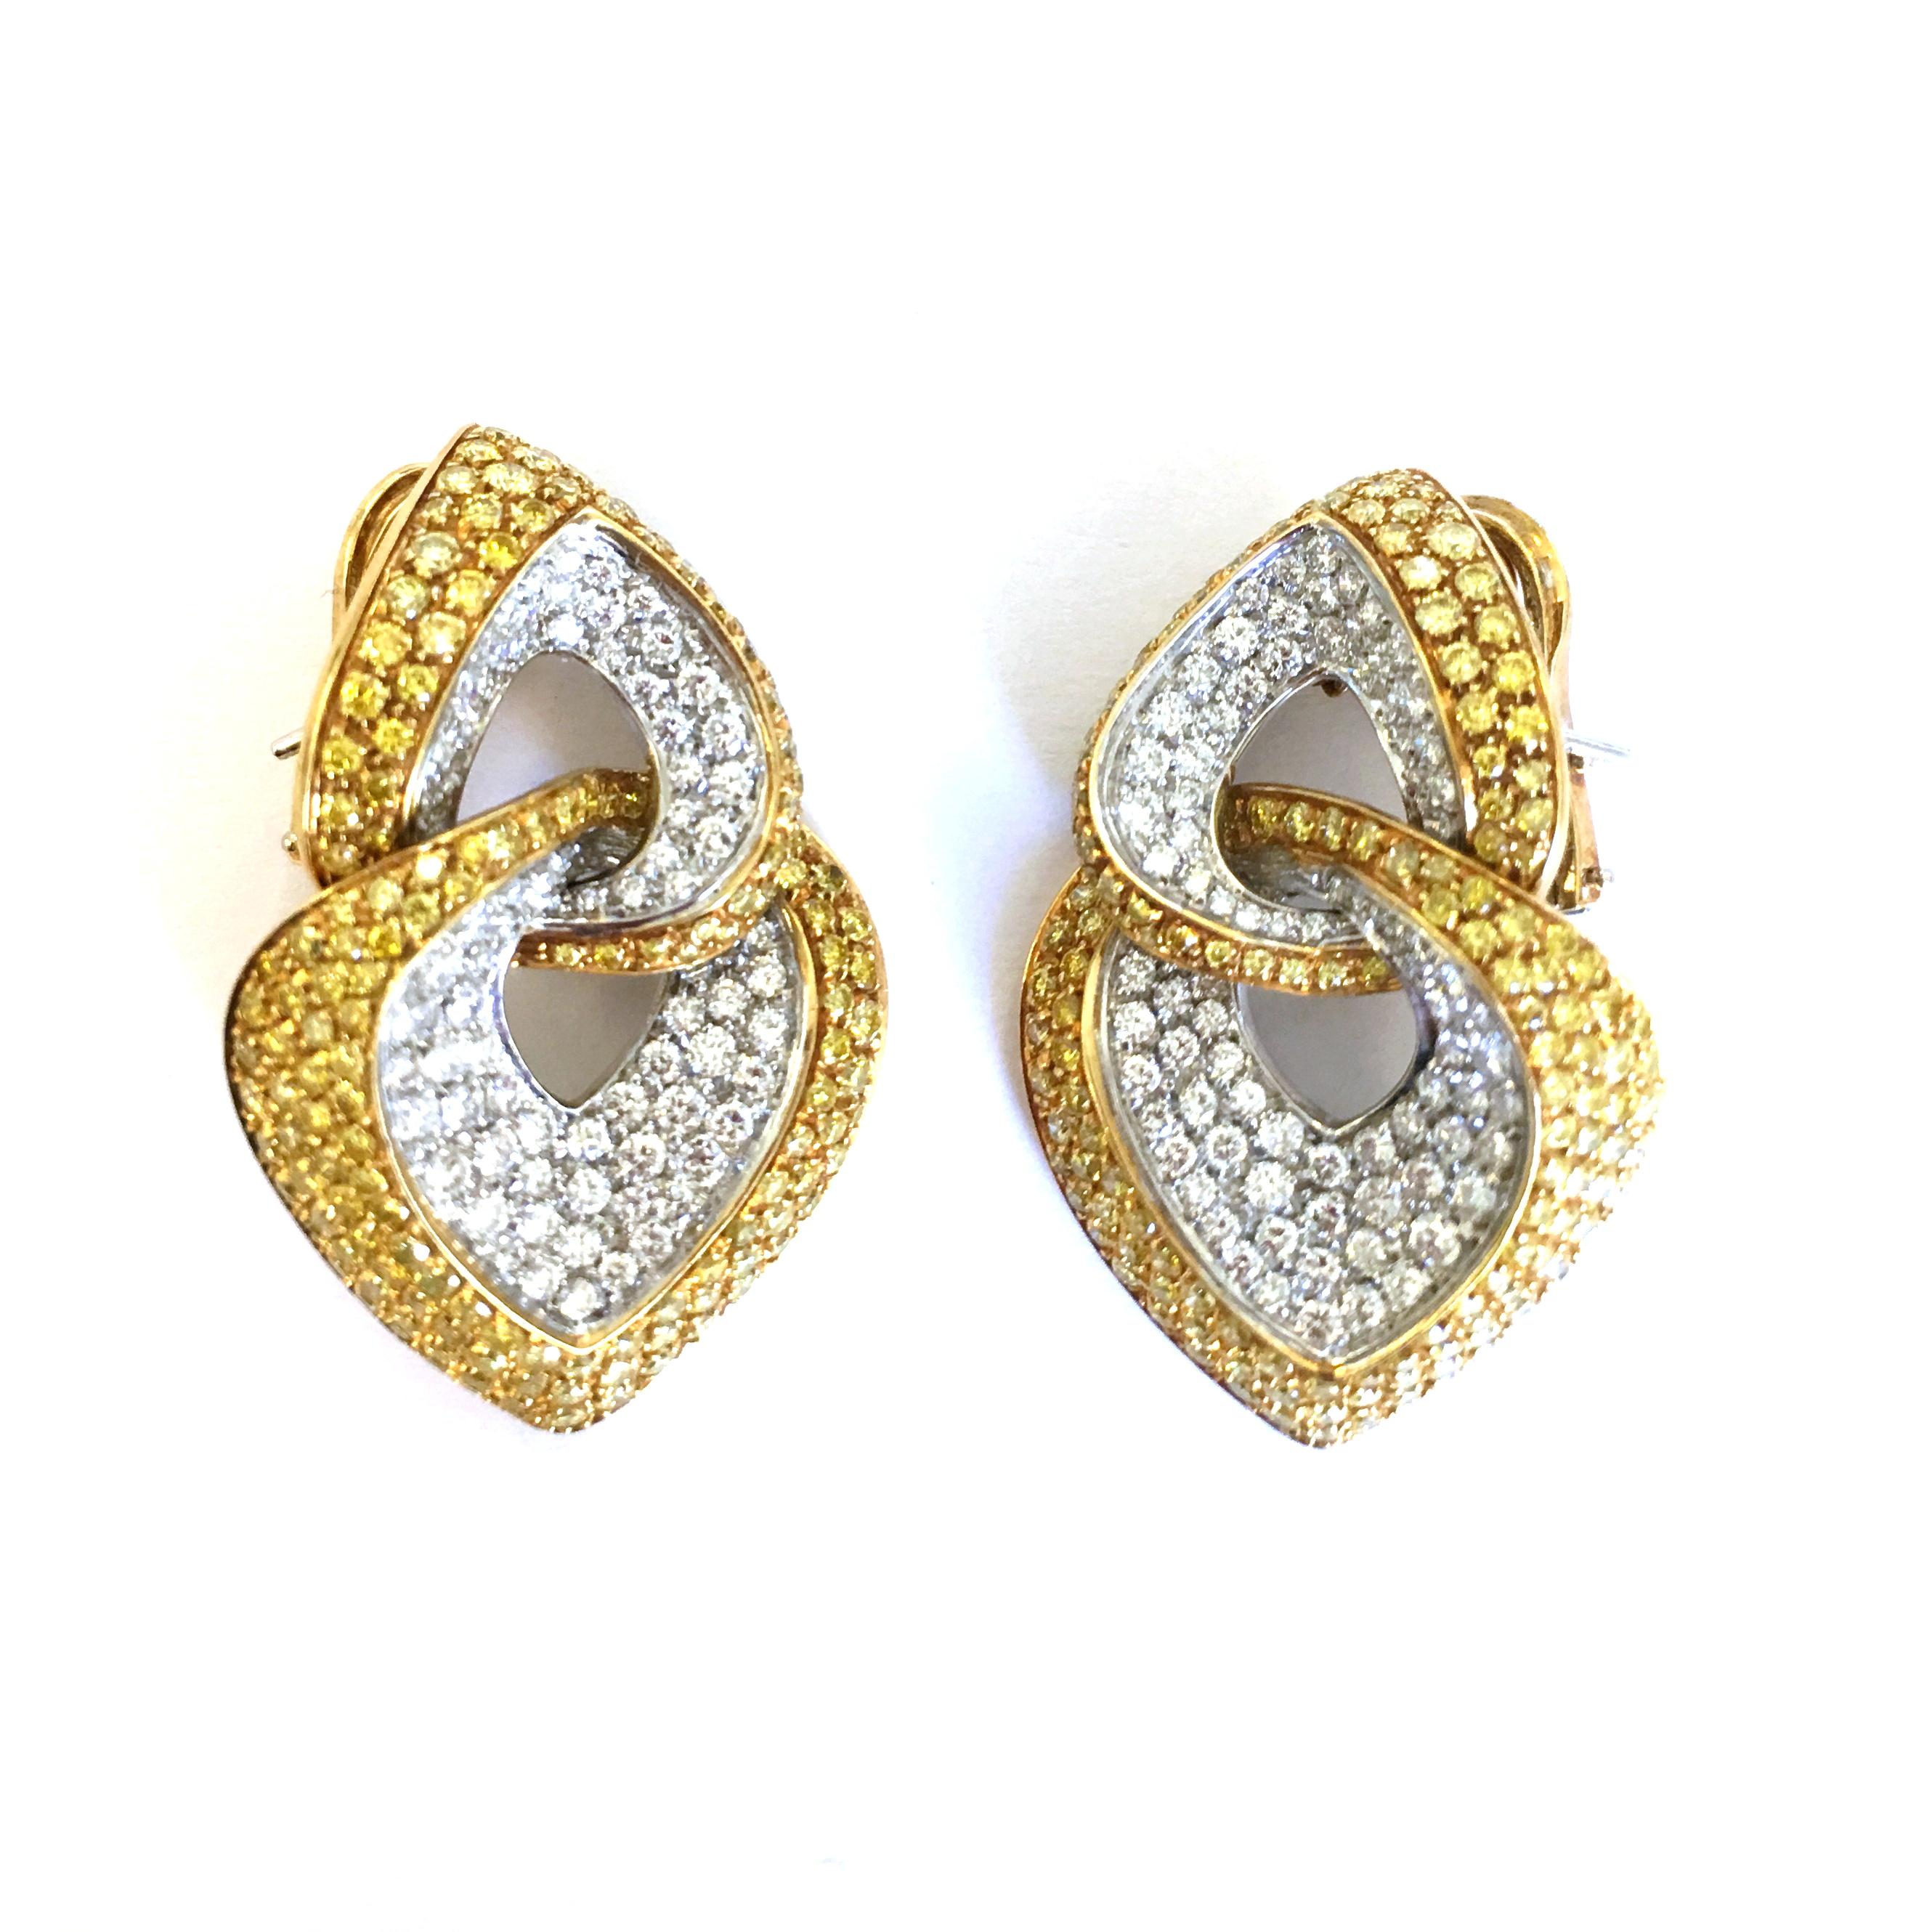 Yellow Diamond and White Diamond Earring in 18 Karat Yellow Gold and White Gold In Excellent Condition For Sale In Geneva, Geneva